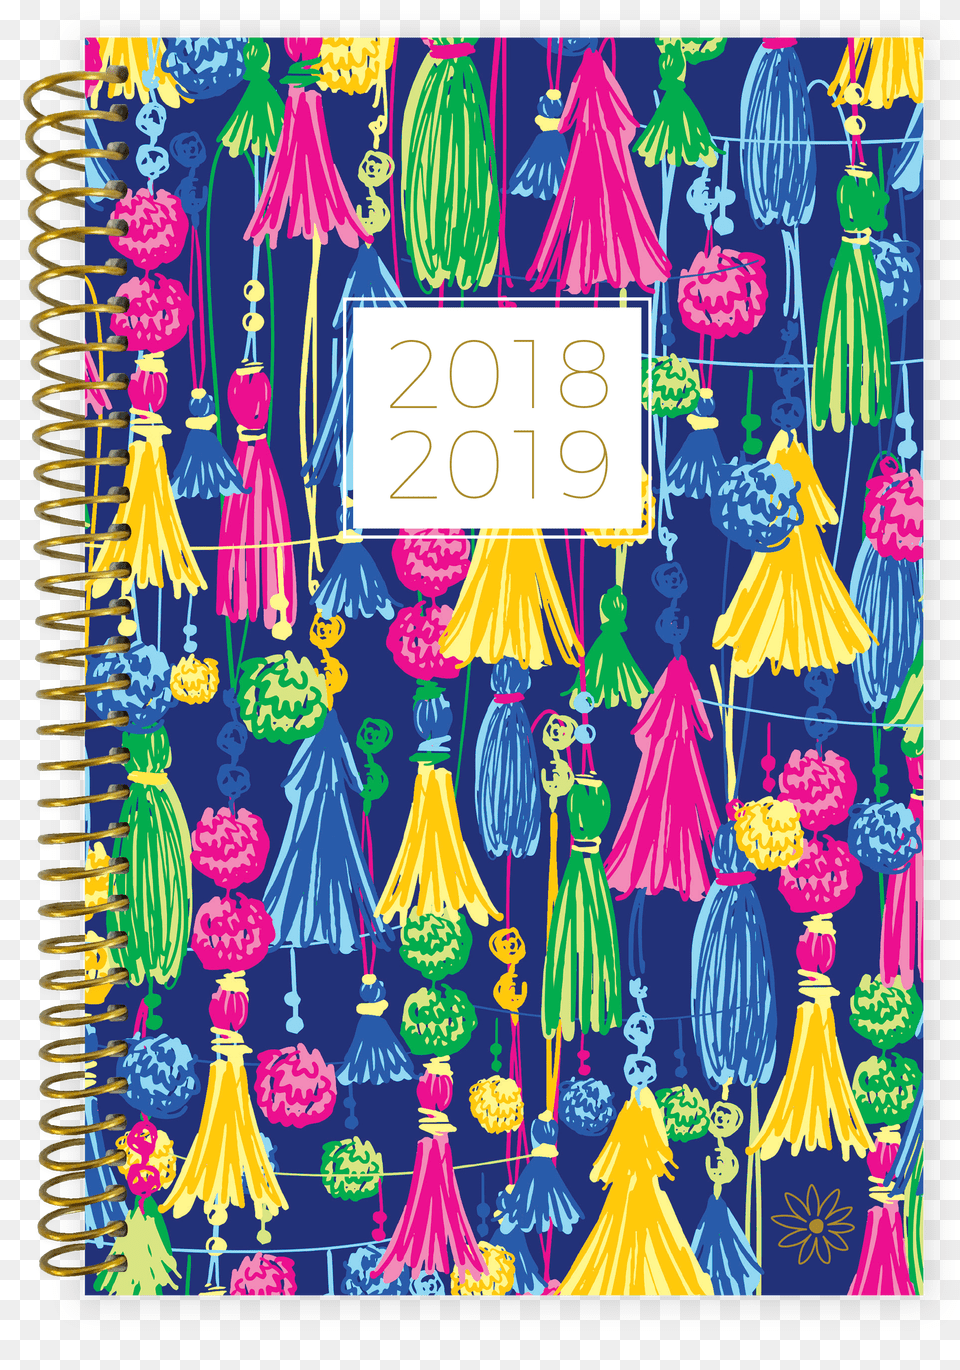 Tassels Bloom Daily Planners 2018 2019 August To Art Paper Free Transparent Png